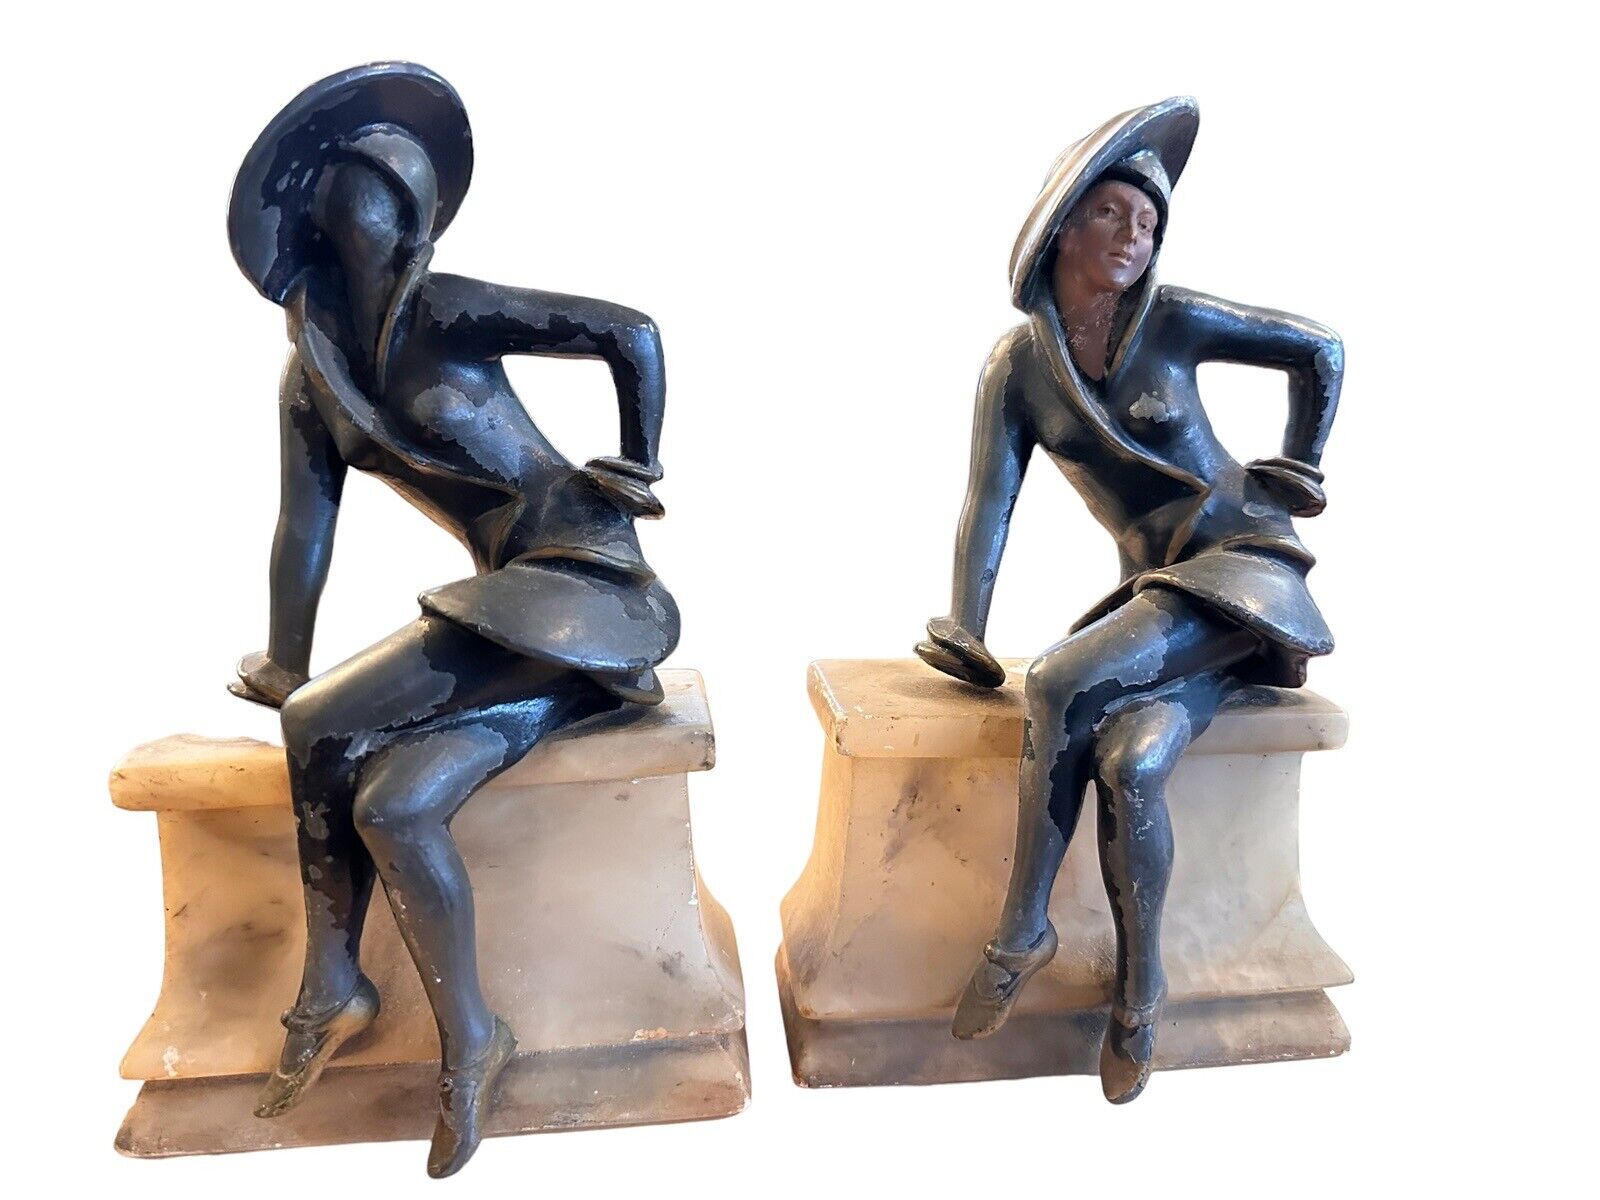 ANTIQUE J.B. HIRSCH ART DECO BOOKEND PAIR SOPHISTICATED LADY IN CIRCA. 1920